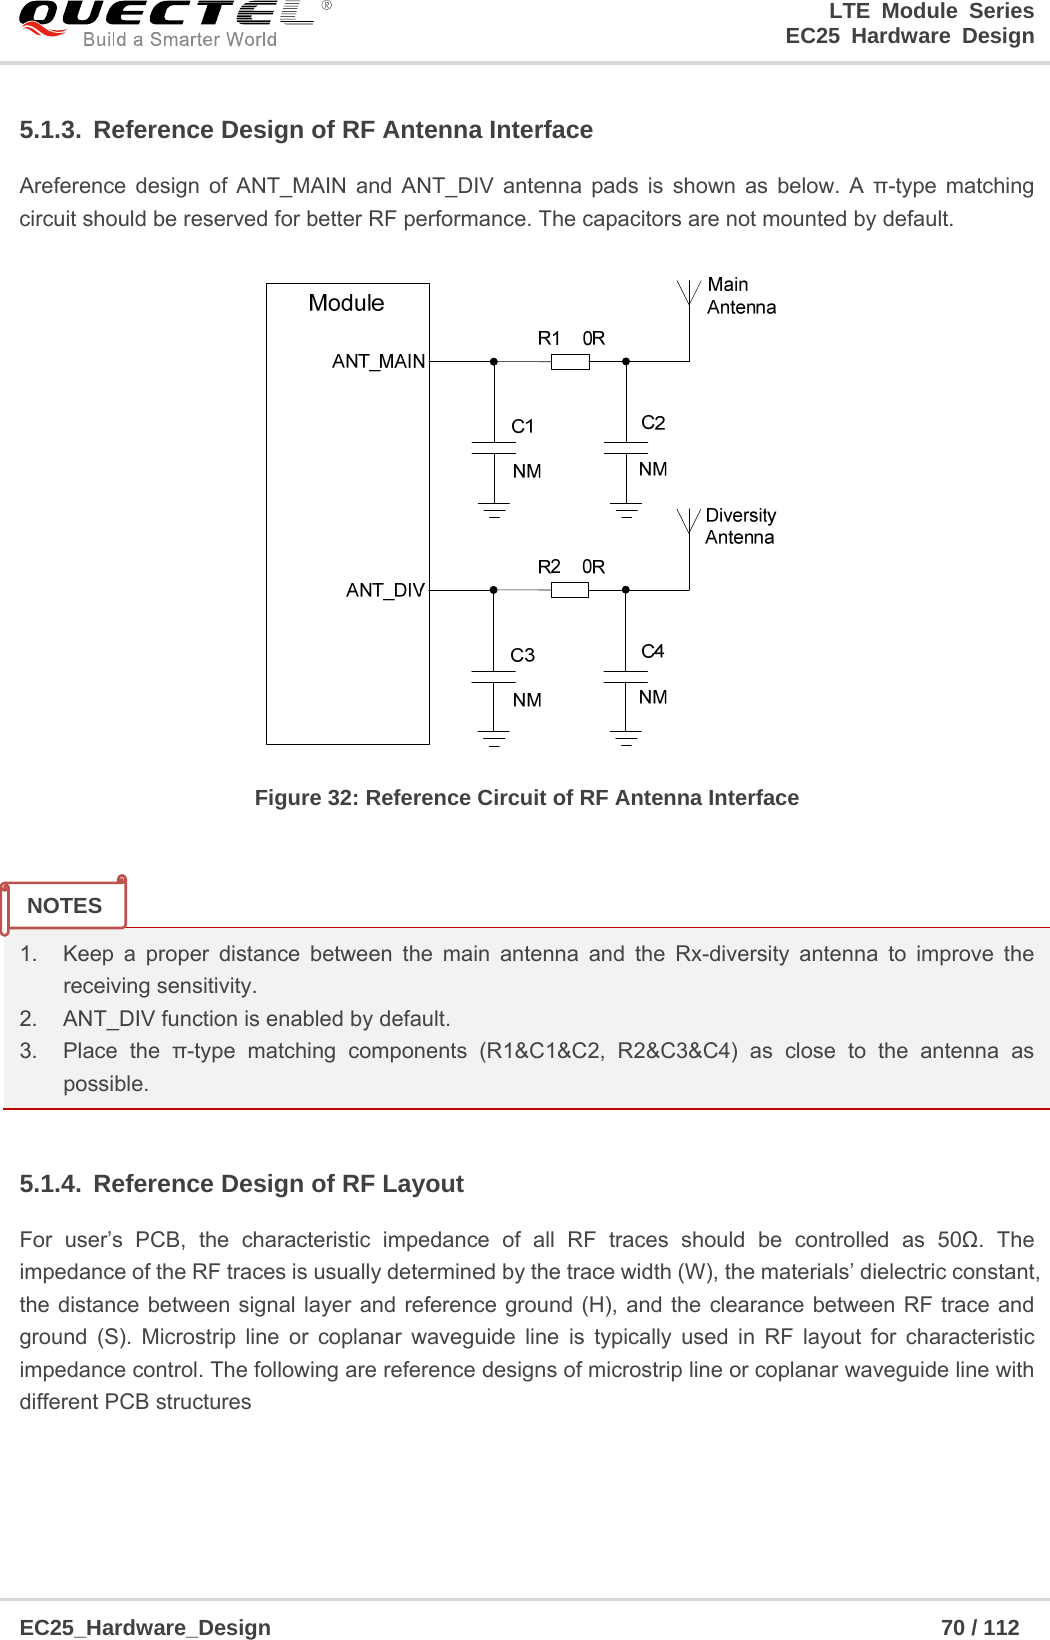 LTE Module Series                                                  EC25 Hardware Design  EC25_Hardware_Design                                                             70 / 112    5.1.3.  Reference Design of RF Antenna Interface Areference design of ANT_MAIN and ANT_DIV antenna pads is shown as below. A π-type matching circuit should be reserved for better RF performance. The capacitors are not mounted by default.  Figure 32: Reference Circuit of RF Antenna Interface   1.  Keep a proper distance between the main antenna and the Rx-diversity antenna to improve the receiving sensitivity. 2. ANT_DIV function is enabled by default. 3.  Place the π-type matching components (R1&amp;C1&amp;C2, R2&amp;C3&amp;C4) as close to the antenna as possible.  5.1.4.  Reference Design of RF Layout For user’s PCB, the characteristic impedance of all RF traces should be controlled as 50Ω. The impedance of the RF traces is usually determined by the trace width (W), the materials’ dielectric constant, the distance between signal layer and reference ground (H), and the clearance between RF trace and ground (S). Microstrip line or coplanar waveguide line is typically used in RF layout for characteristic impedance control. The following are reference designs of microstrip line or coplanar waveguide line with different PCB structures NOTES 